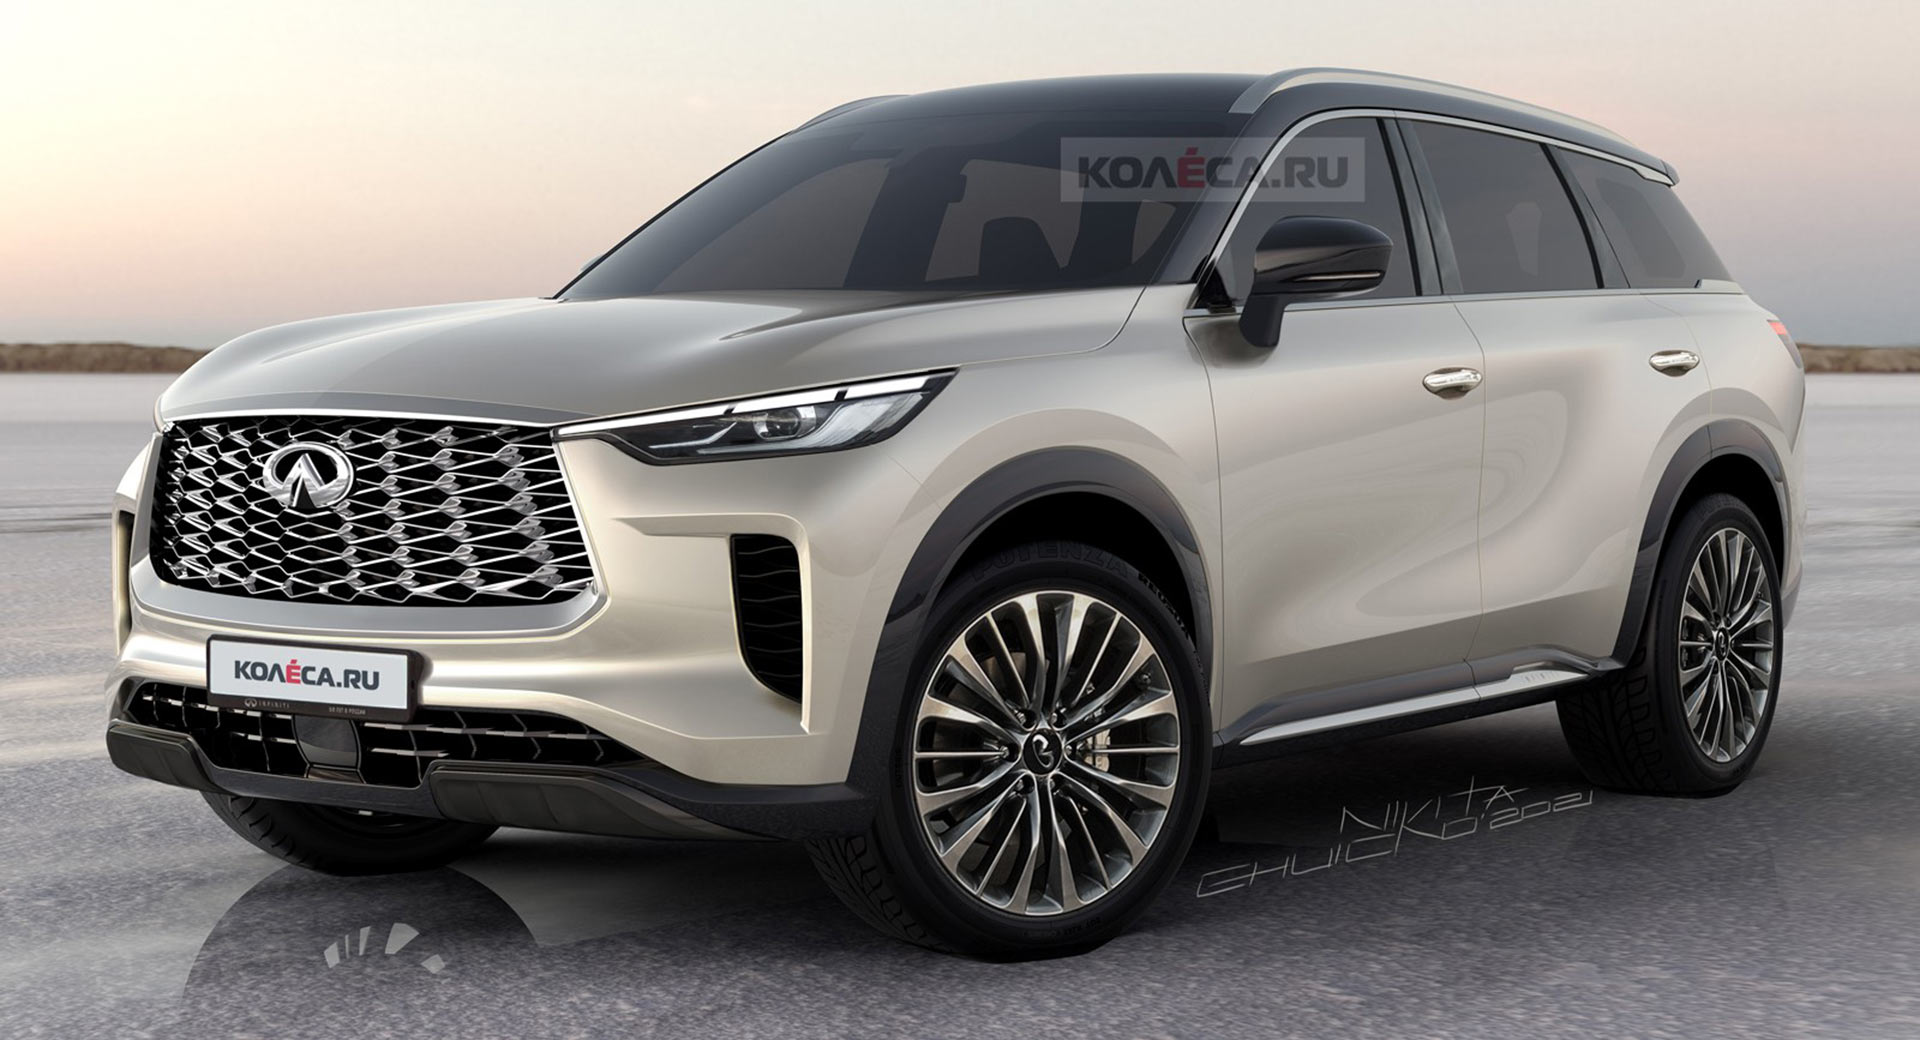 2022 Infiniti QX60 These Illustrations Show What The Production SUV